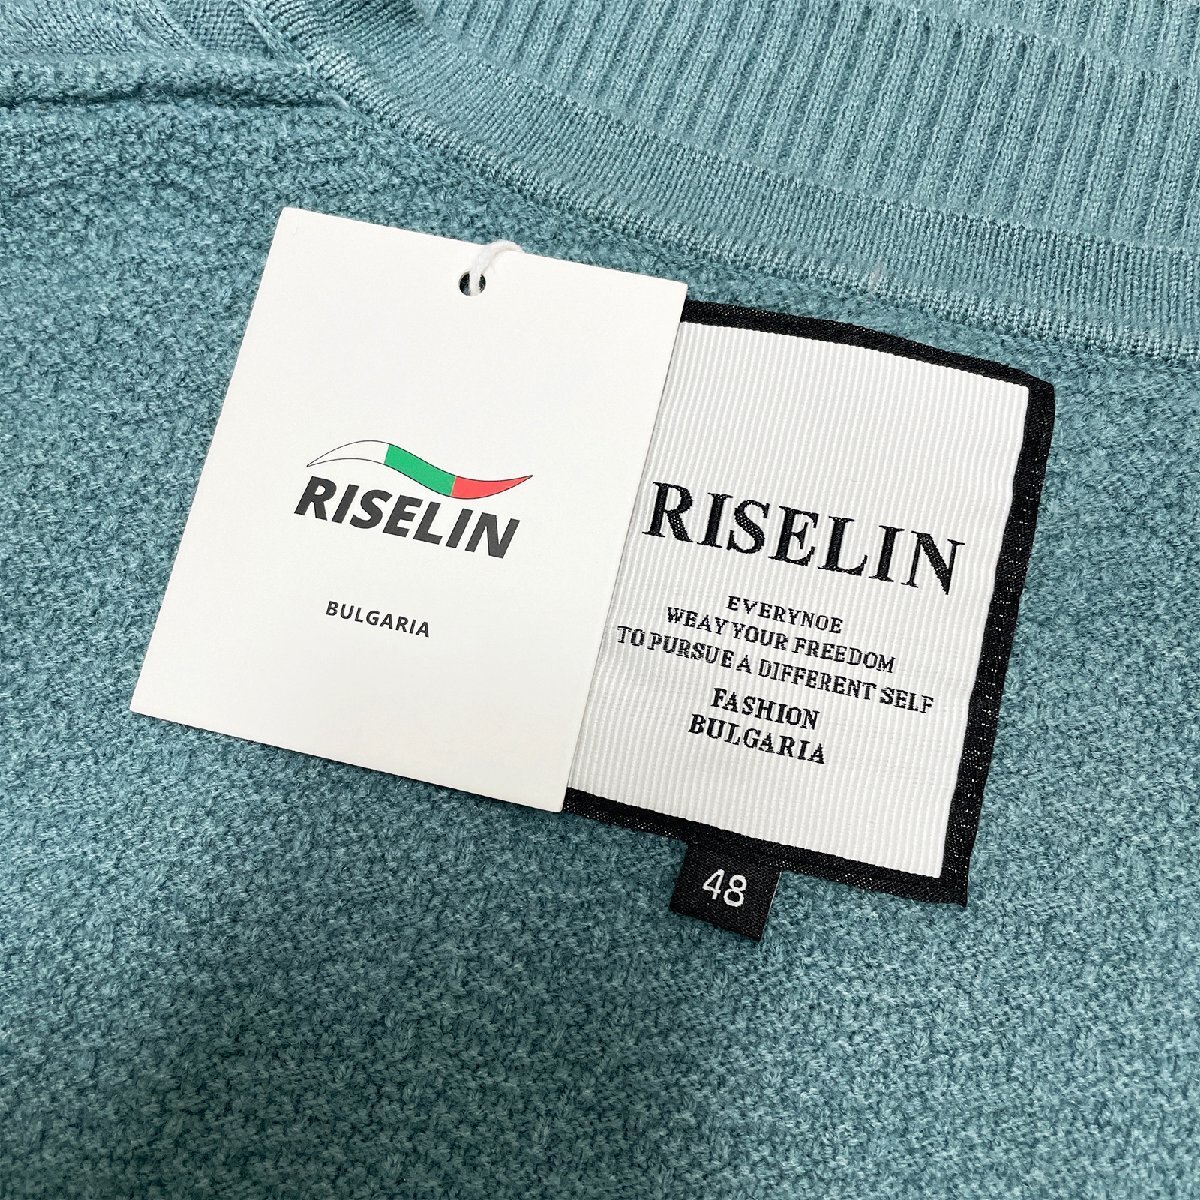  standard Europe made * regular price 5 ten thousand * BVLGARY a departure *RISELIN sweater on goods wool . protection against cold soft comfortable knitted tops beautiful lady's XL/50